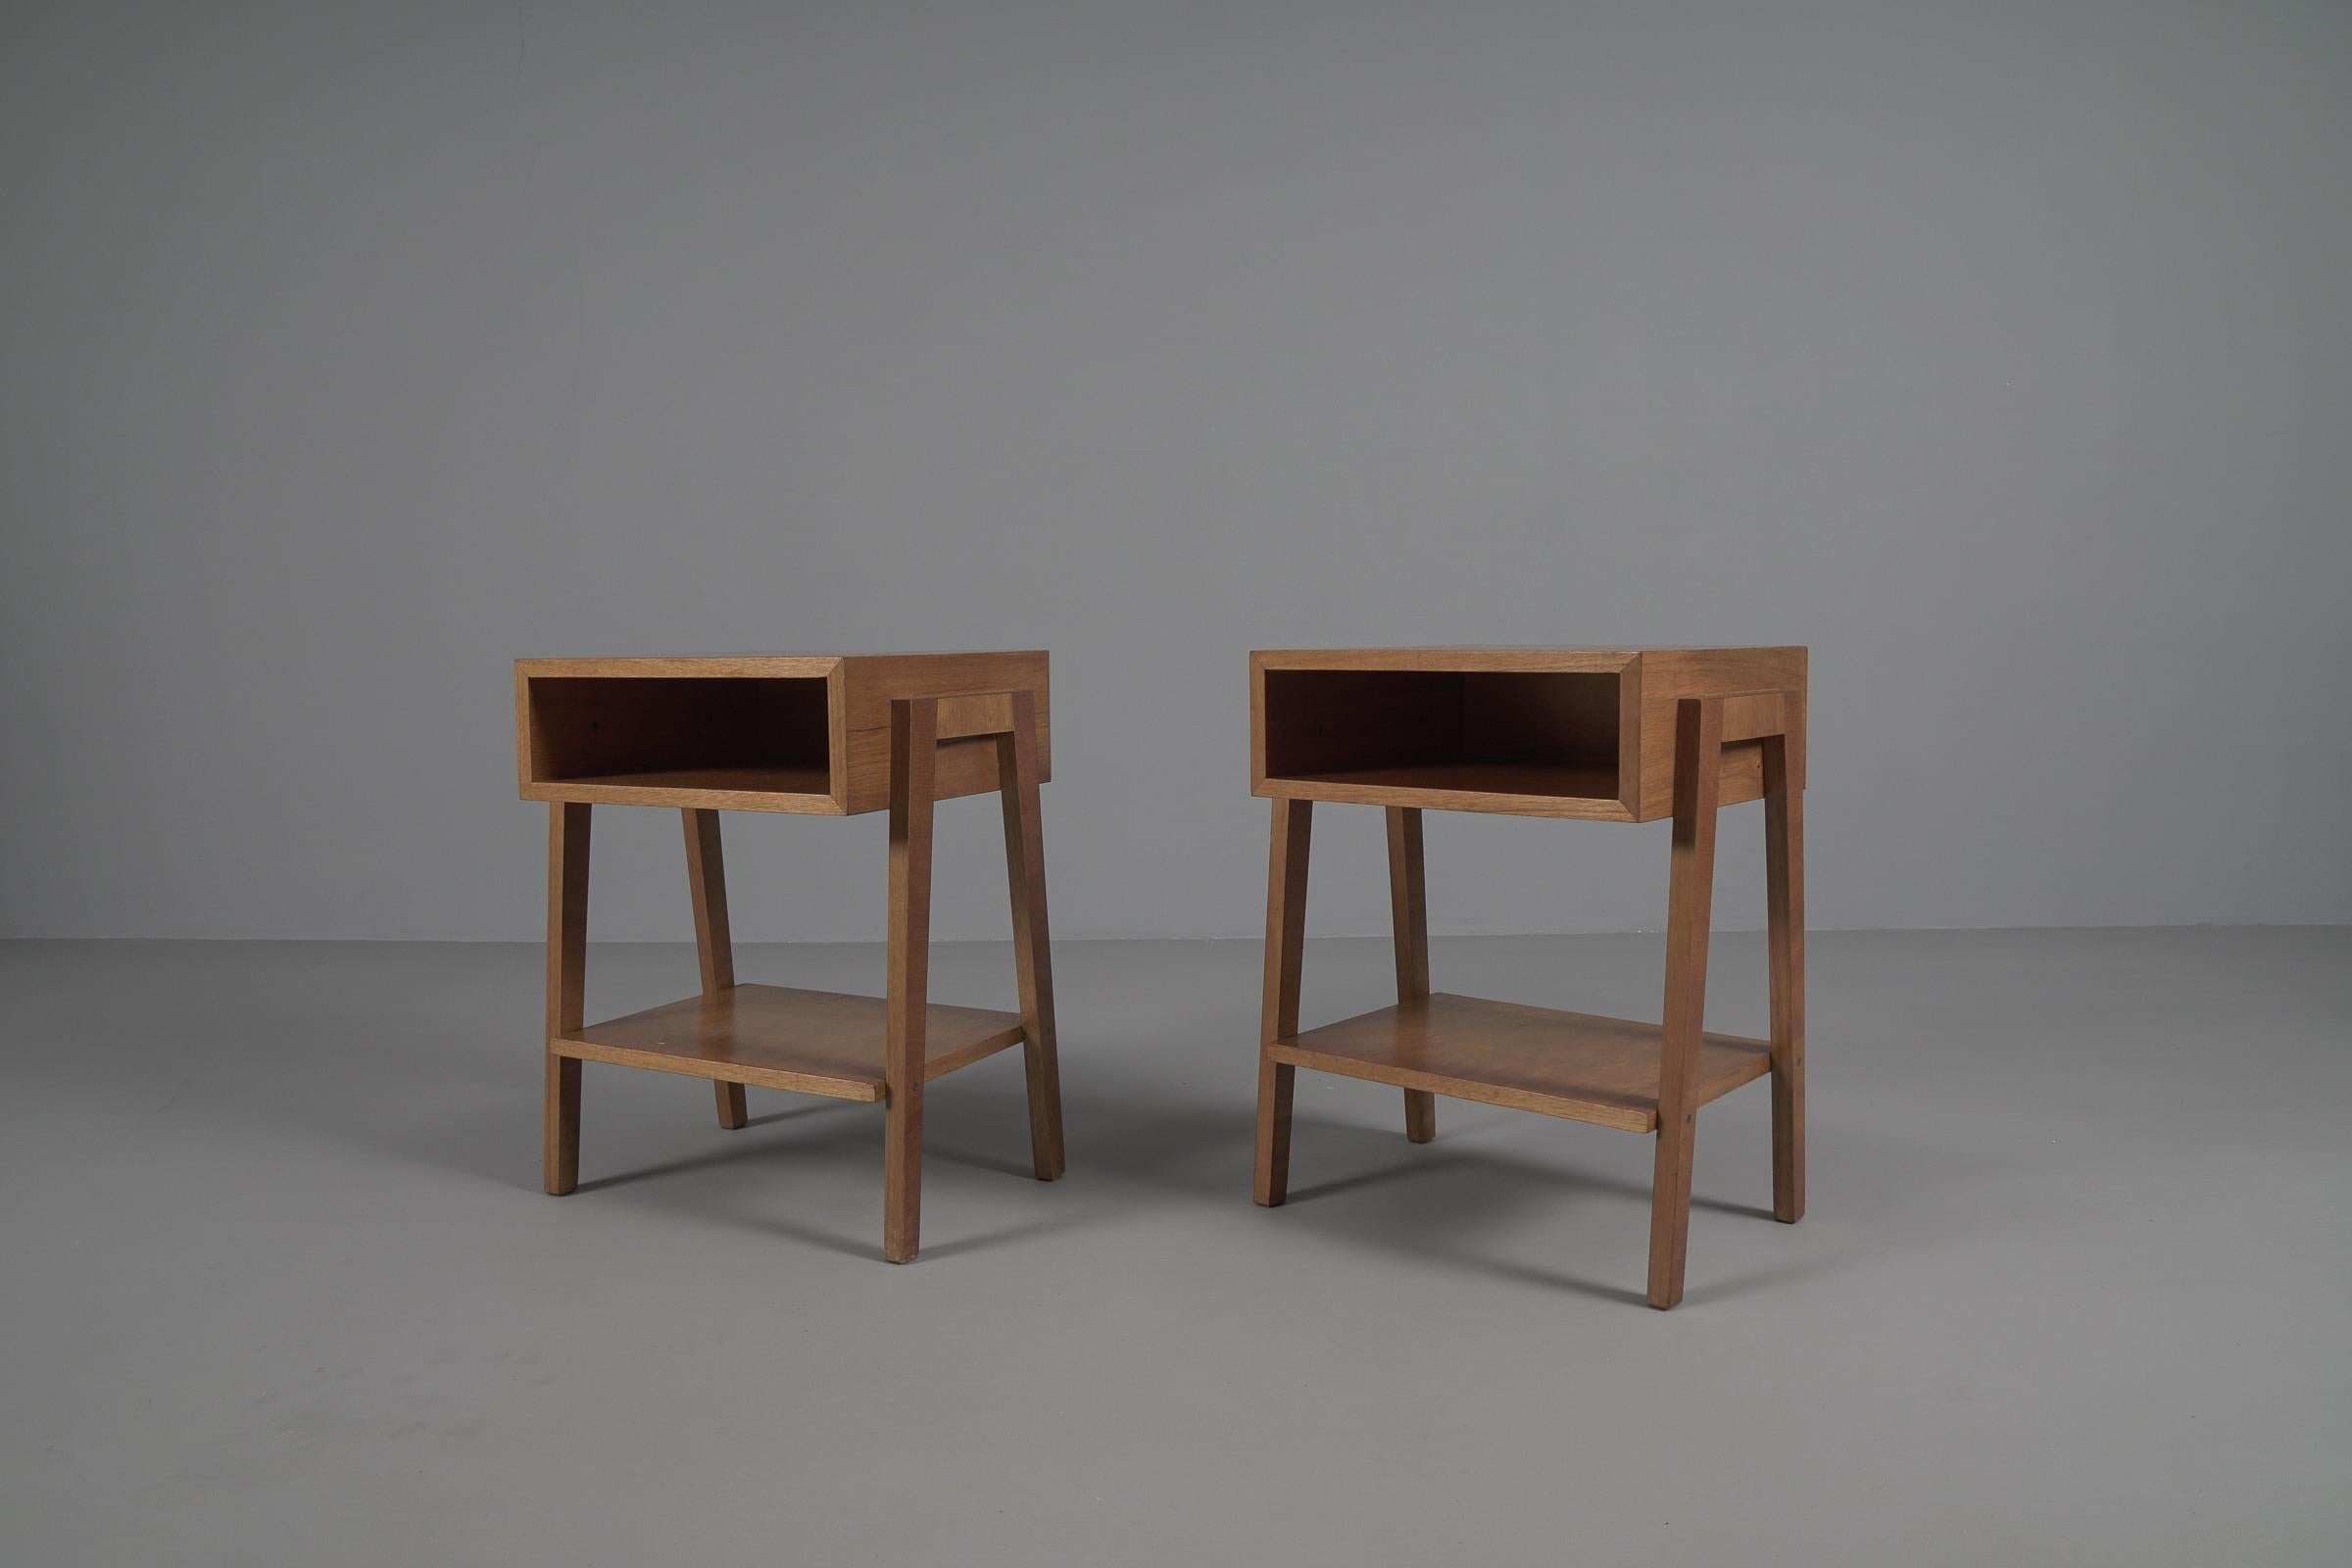  Pair of Minimalistic Mid-Century Modern Wooden Nightstands, Italy 1950s In Good Condition For Sale In Nürnberg, Bayern